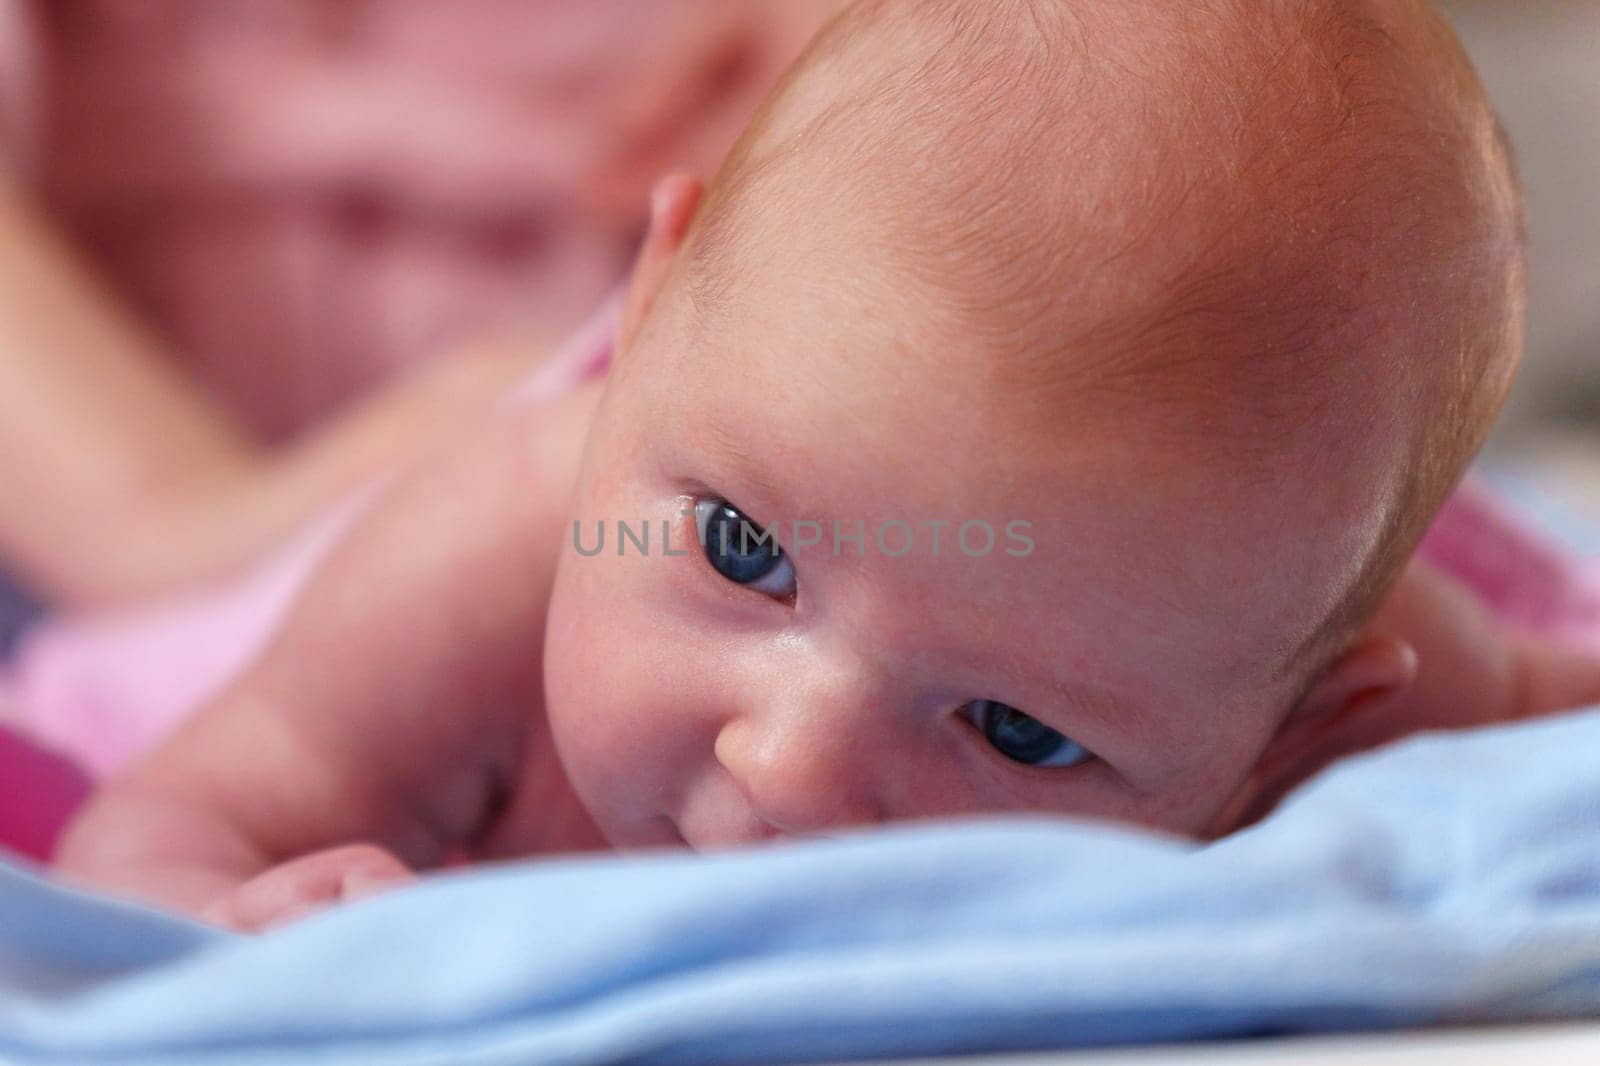 Curiosity of a two-month-old baby, as they gaze gently into the lens for a heartwarming portrait. by darksoul72